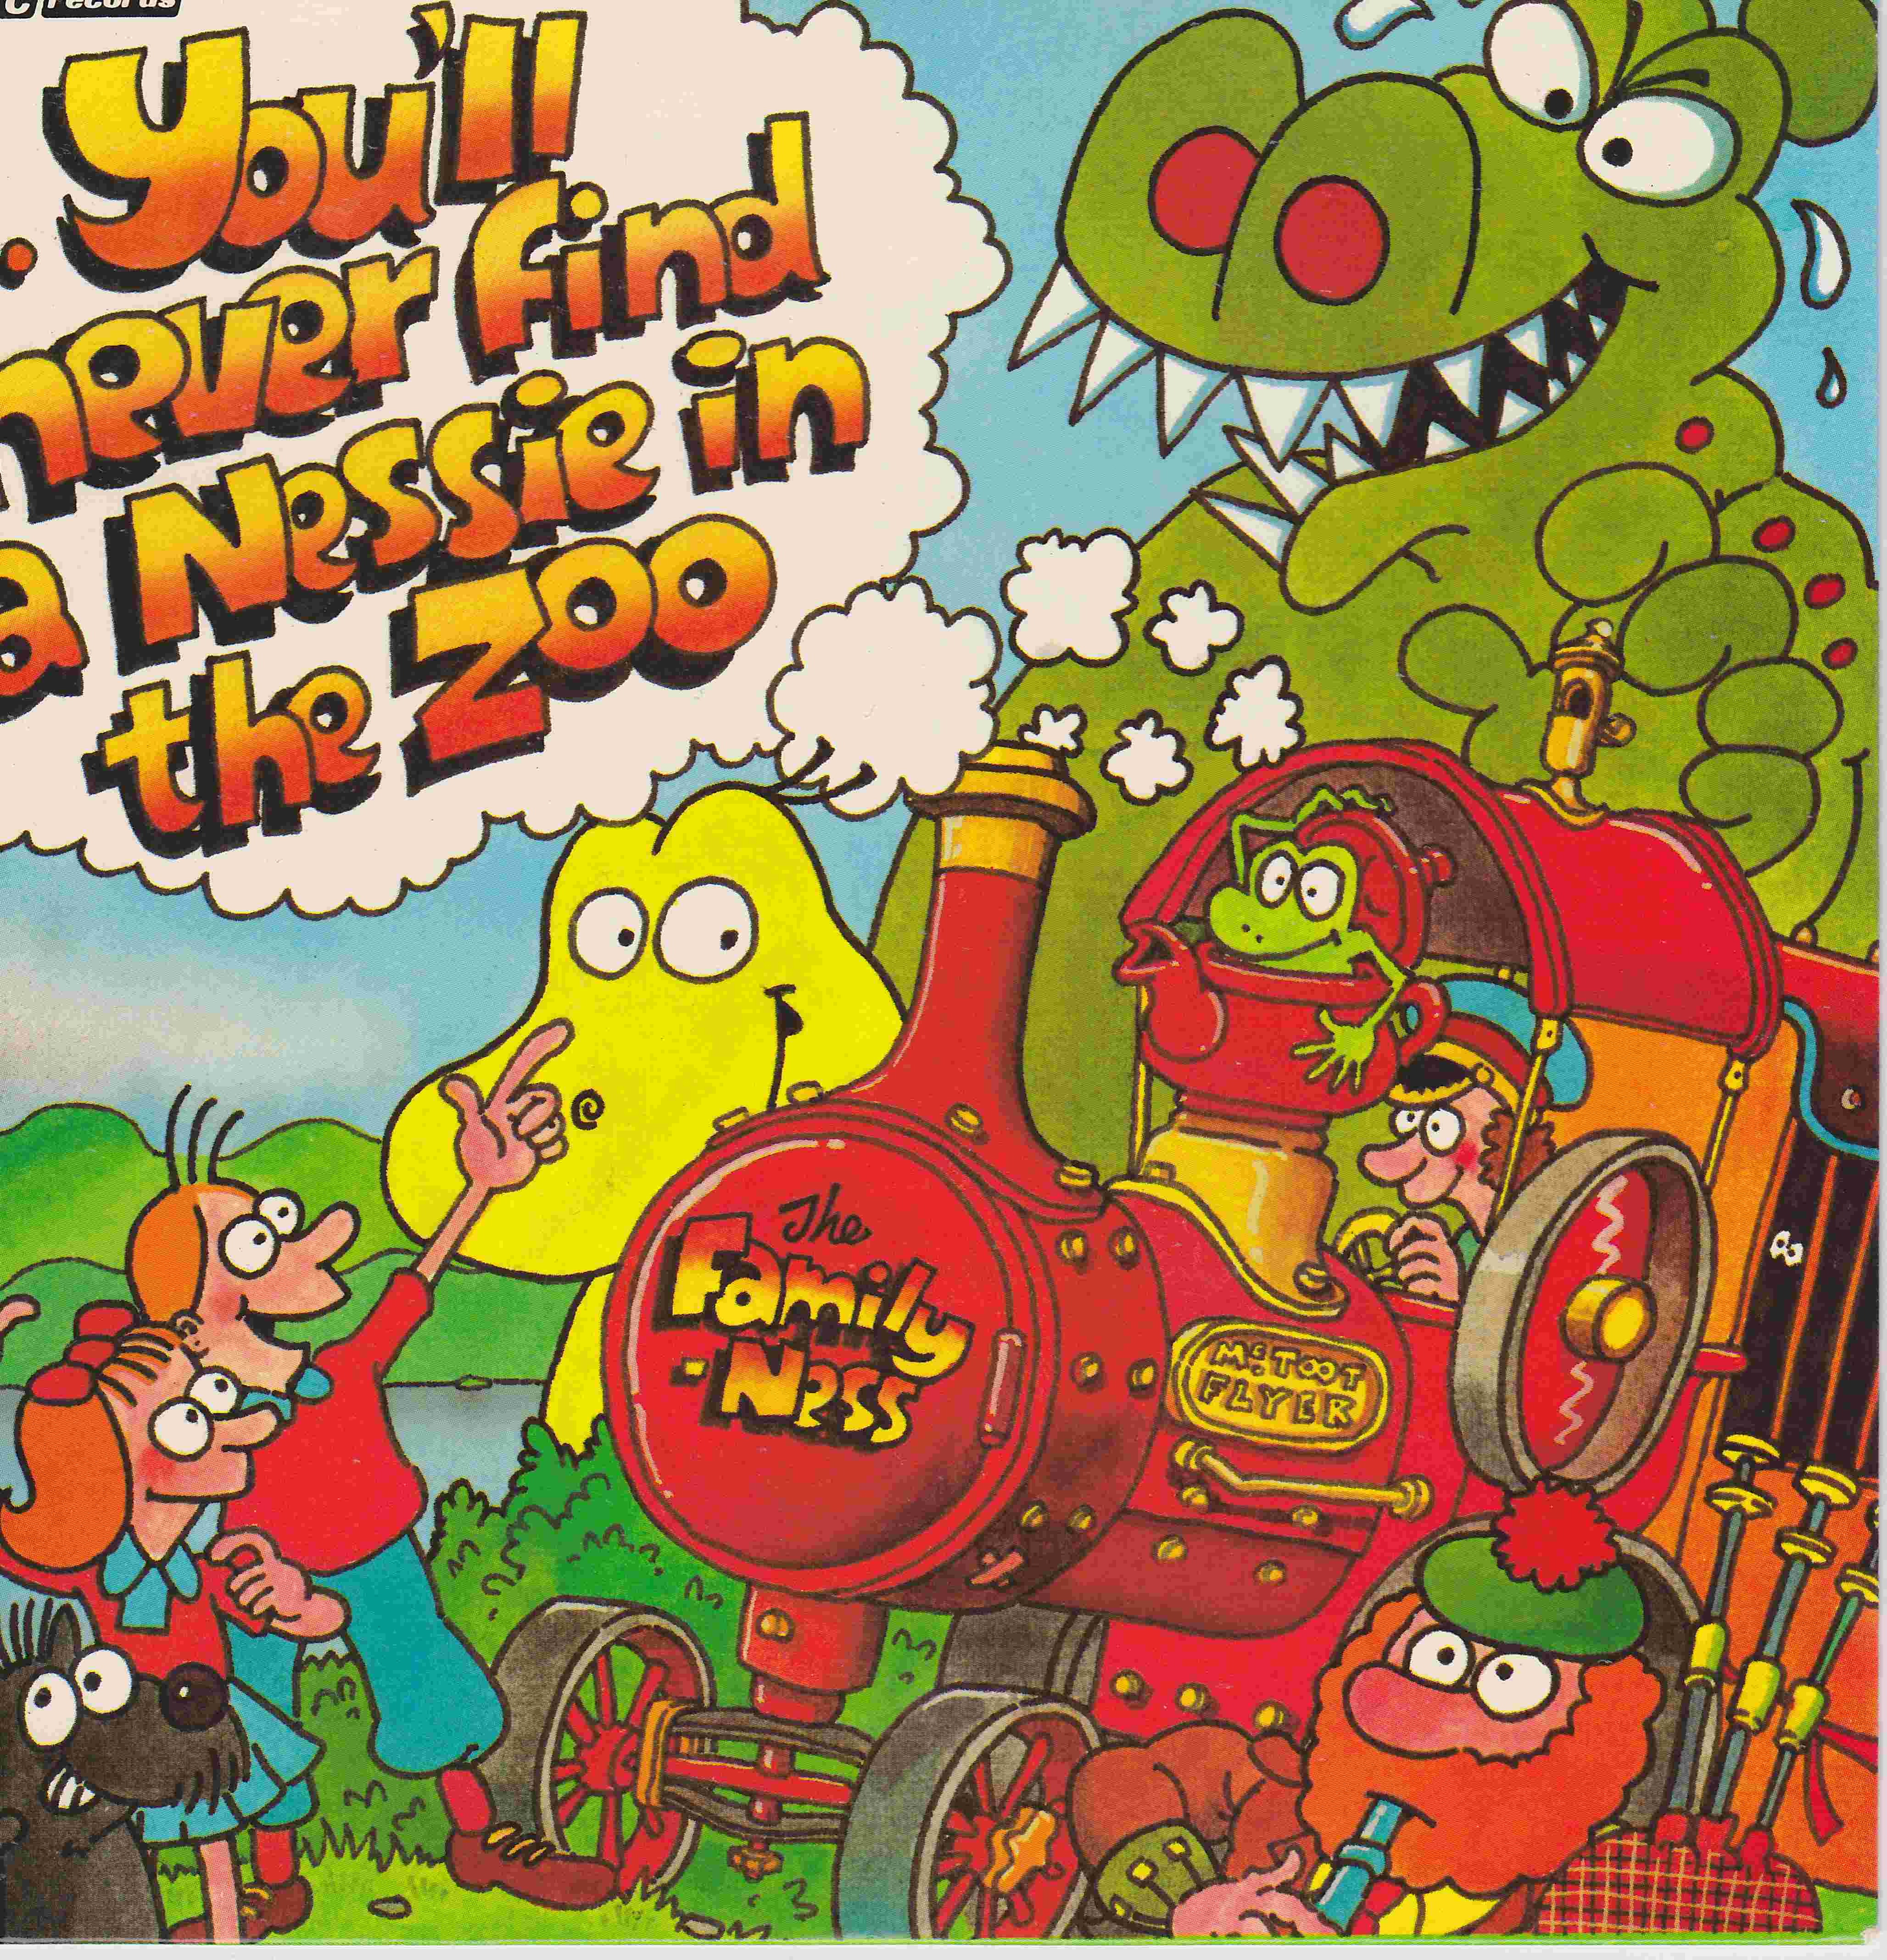 Picture of RESL 155 You'll never find a Nessie (The family ness) by artist The Family Ness from the BBC records and Tapes library